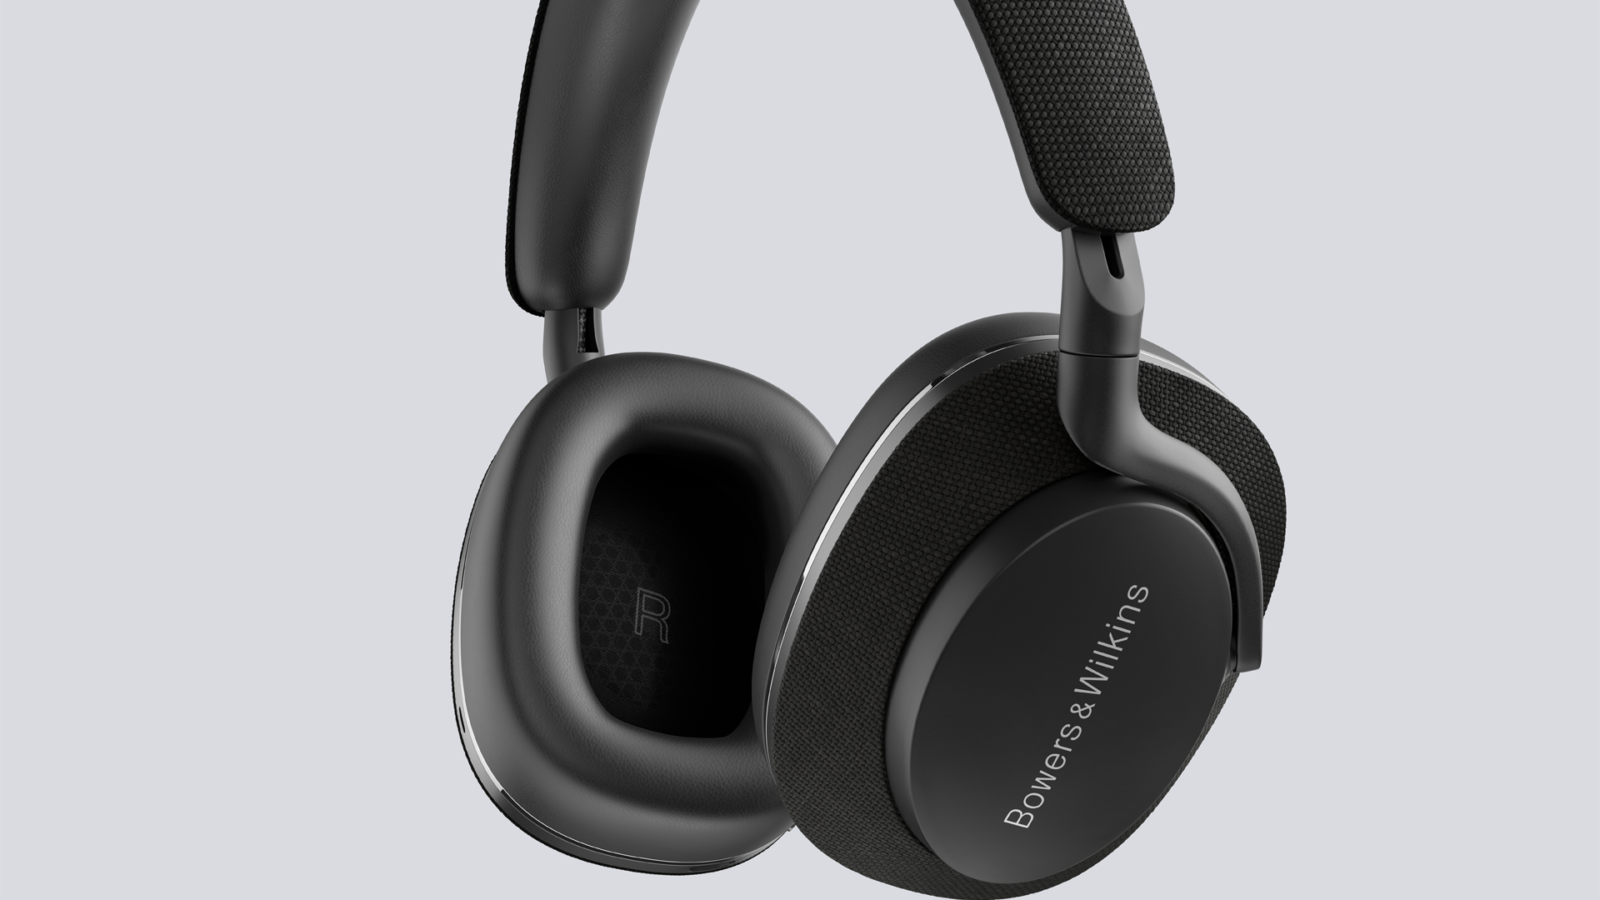 Can Bowers amp Wilkins new headphones challenge the AirPods Max